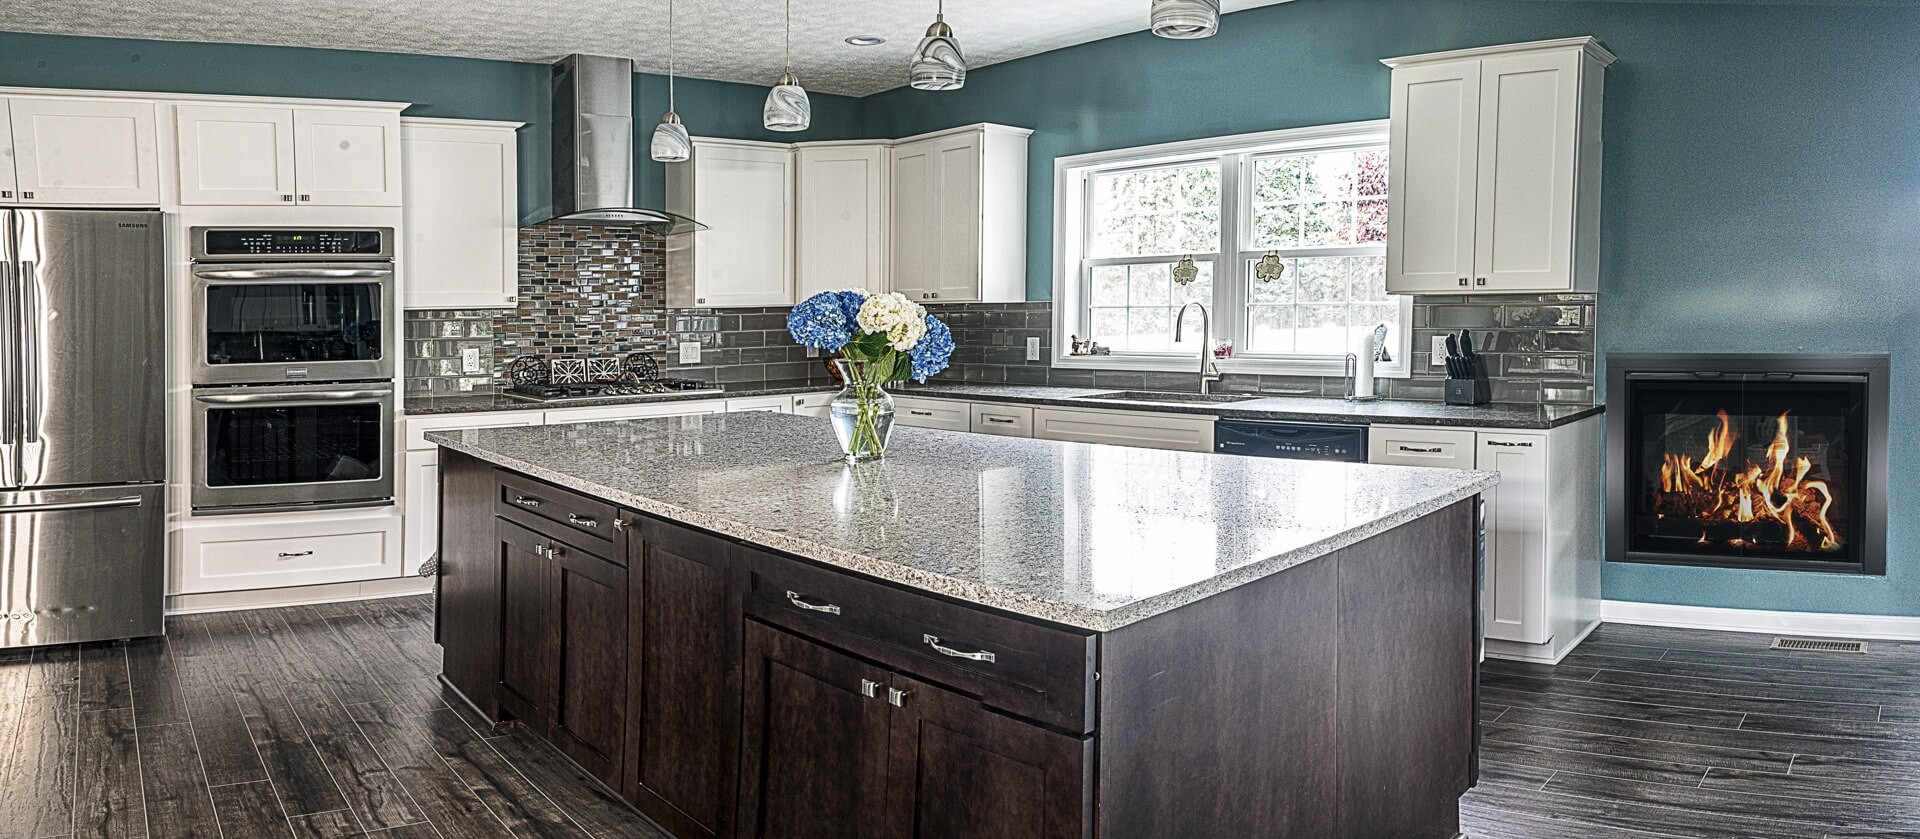 Kitchen Remodeling Pittsburgh
 Kitchen Remodeling Pittsburgh